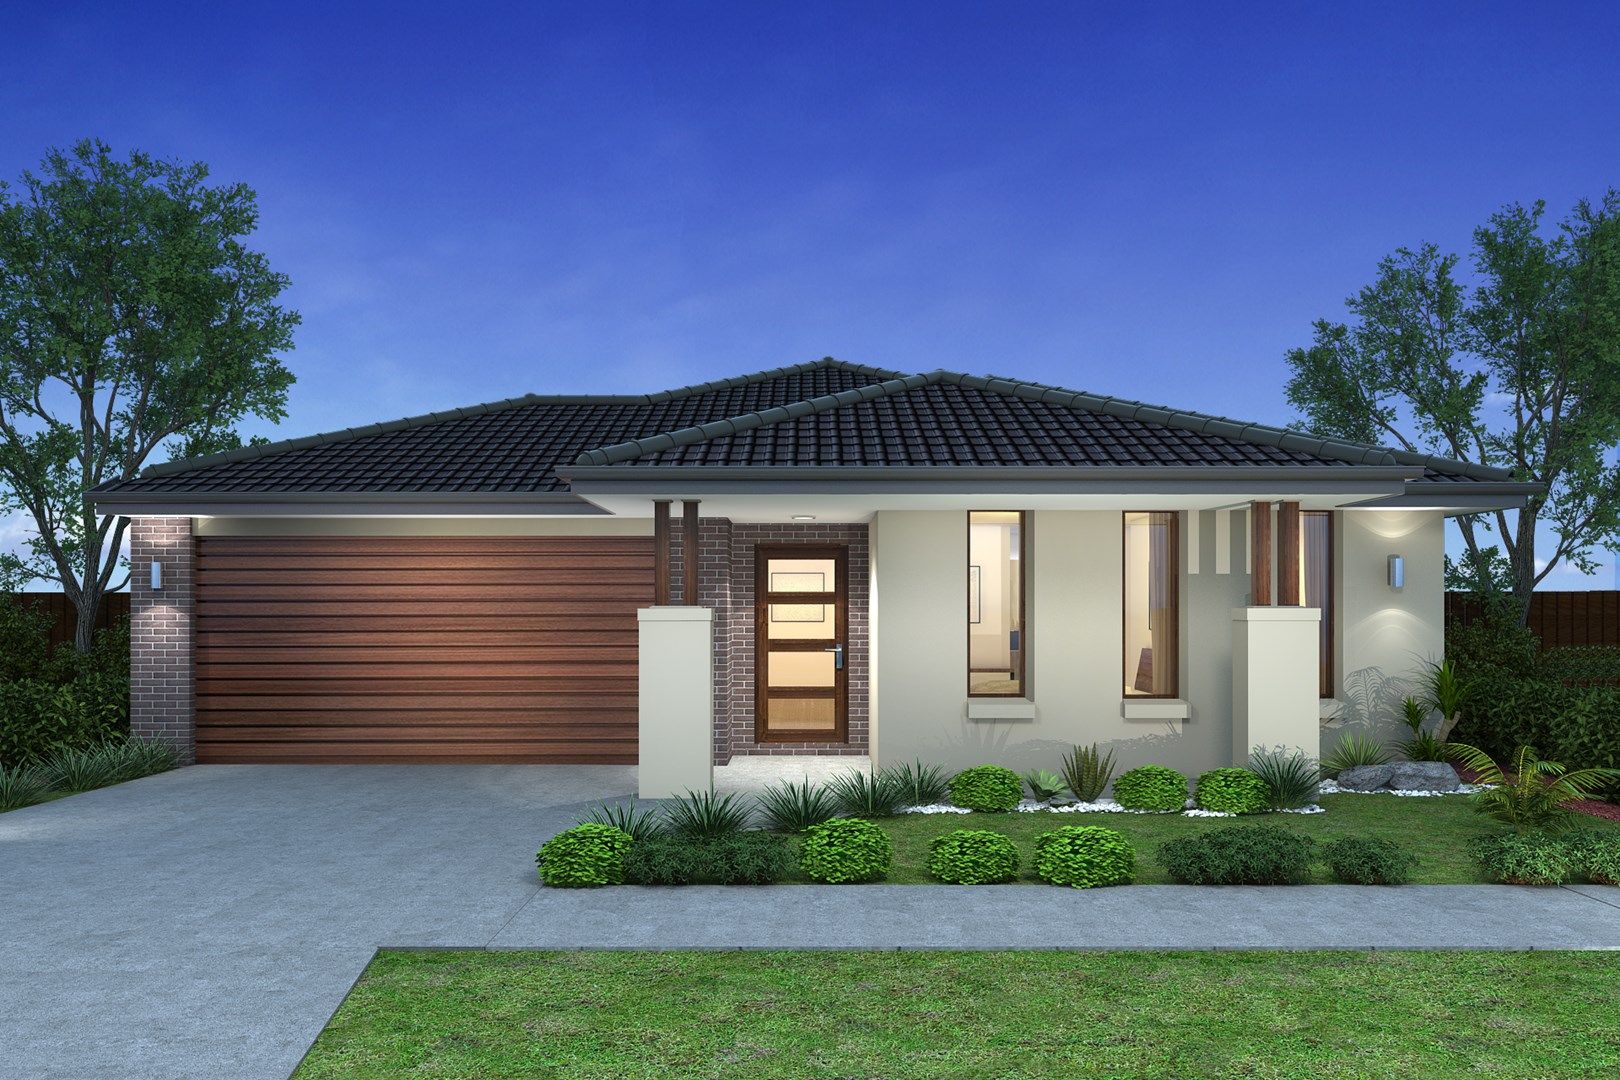 4 bedrooms New House & Land in Lot 705 Clipstone Crescent FRASER RISE VIC, 3336